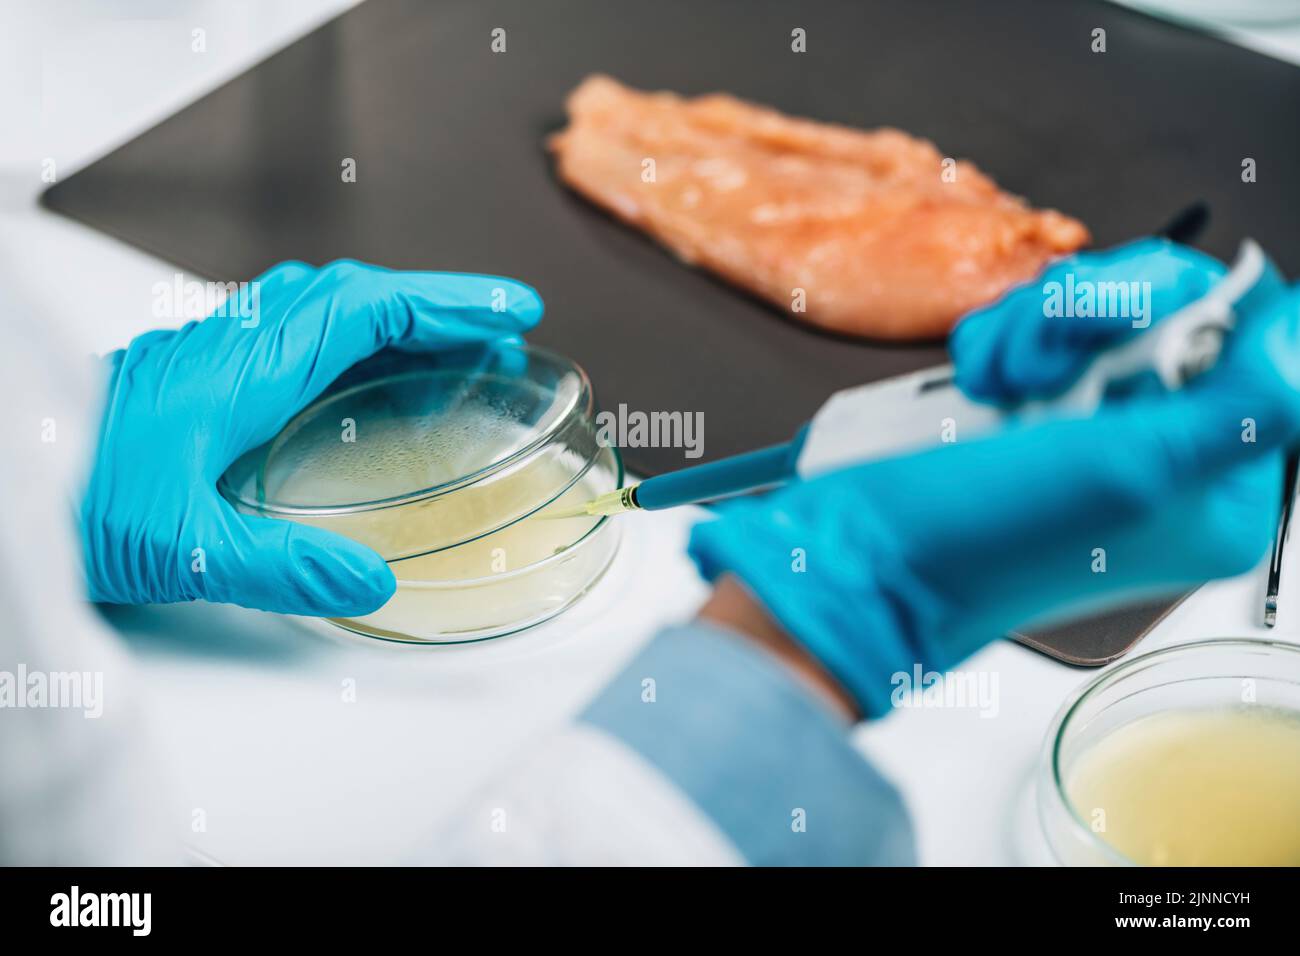 Quality control inspector testing poultry sample Stock Photo